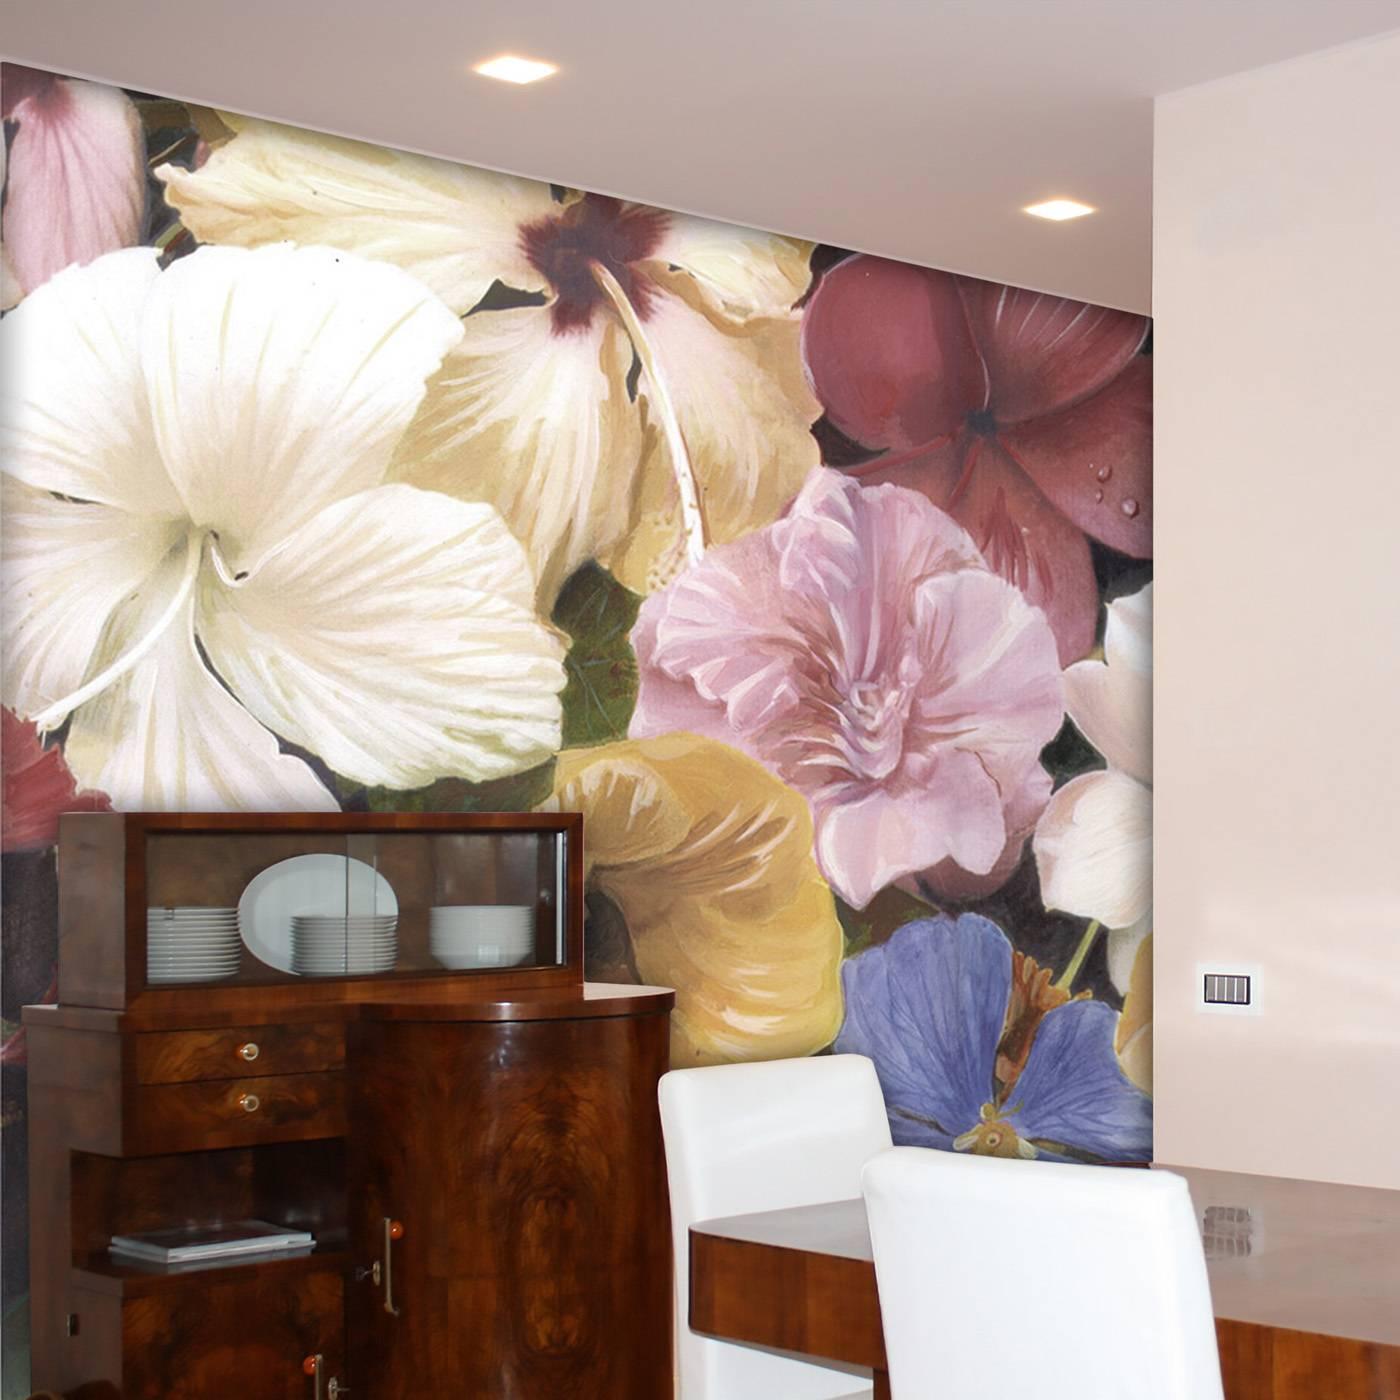 With this magnificent wallpaper, the viewer will have the impression of being inside a bouquet of tropical flowers, rendered in all their vivid colors and striking details by the hand of expert artisans. This one-of-a-kind piece of wall decoration